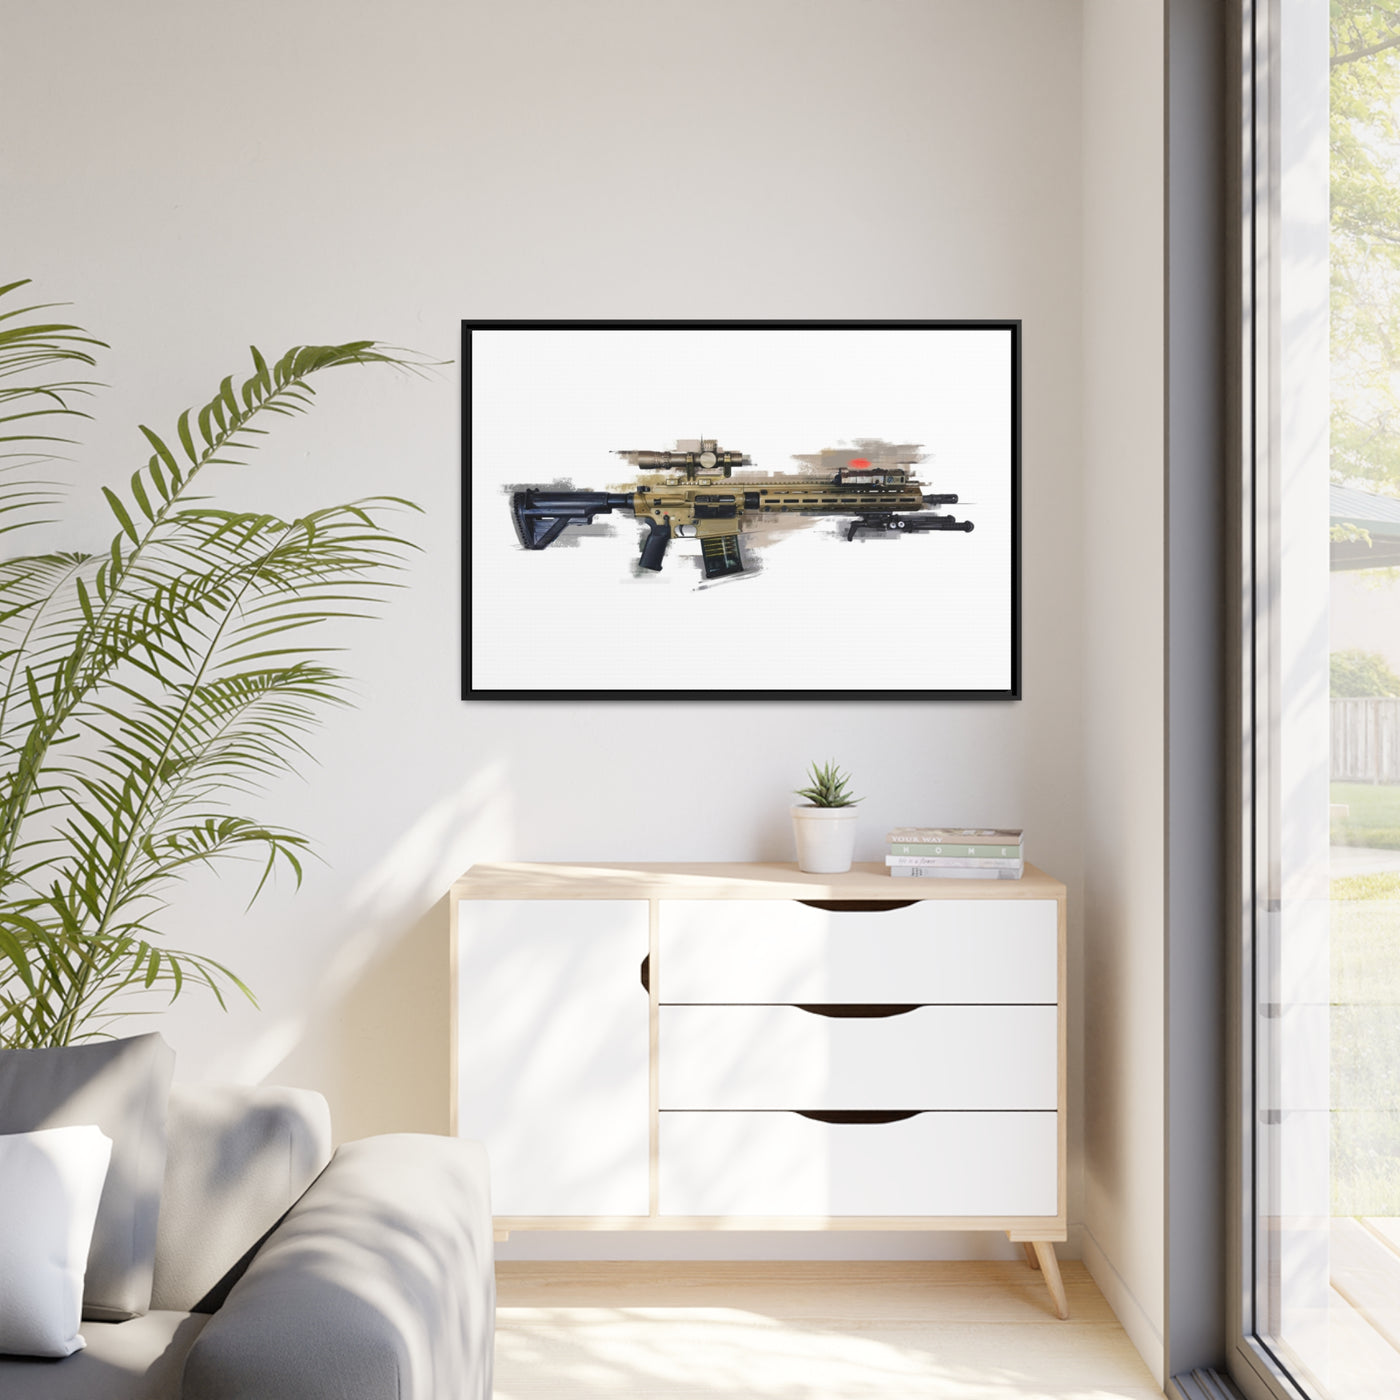 German 7.62x51mm AR10 Battle Rifle Painting - Black Framed Wrapped Canvas - Value Collection